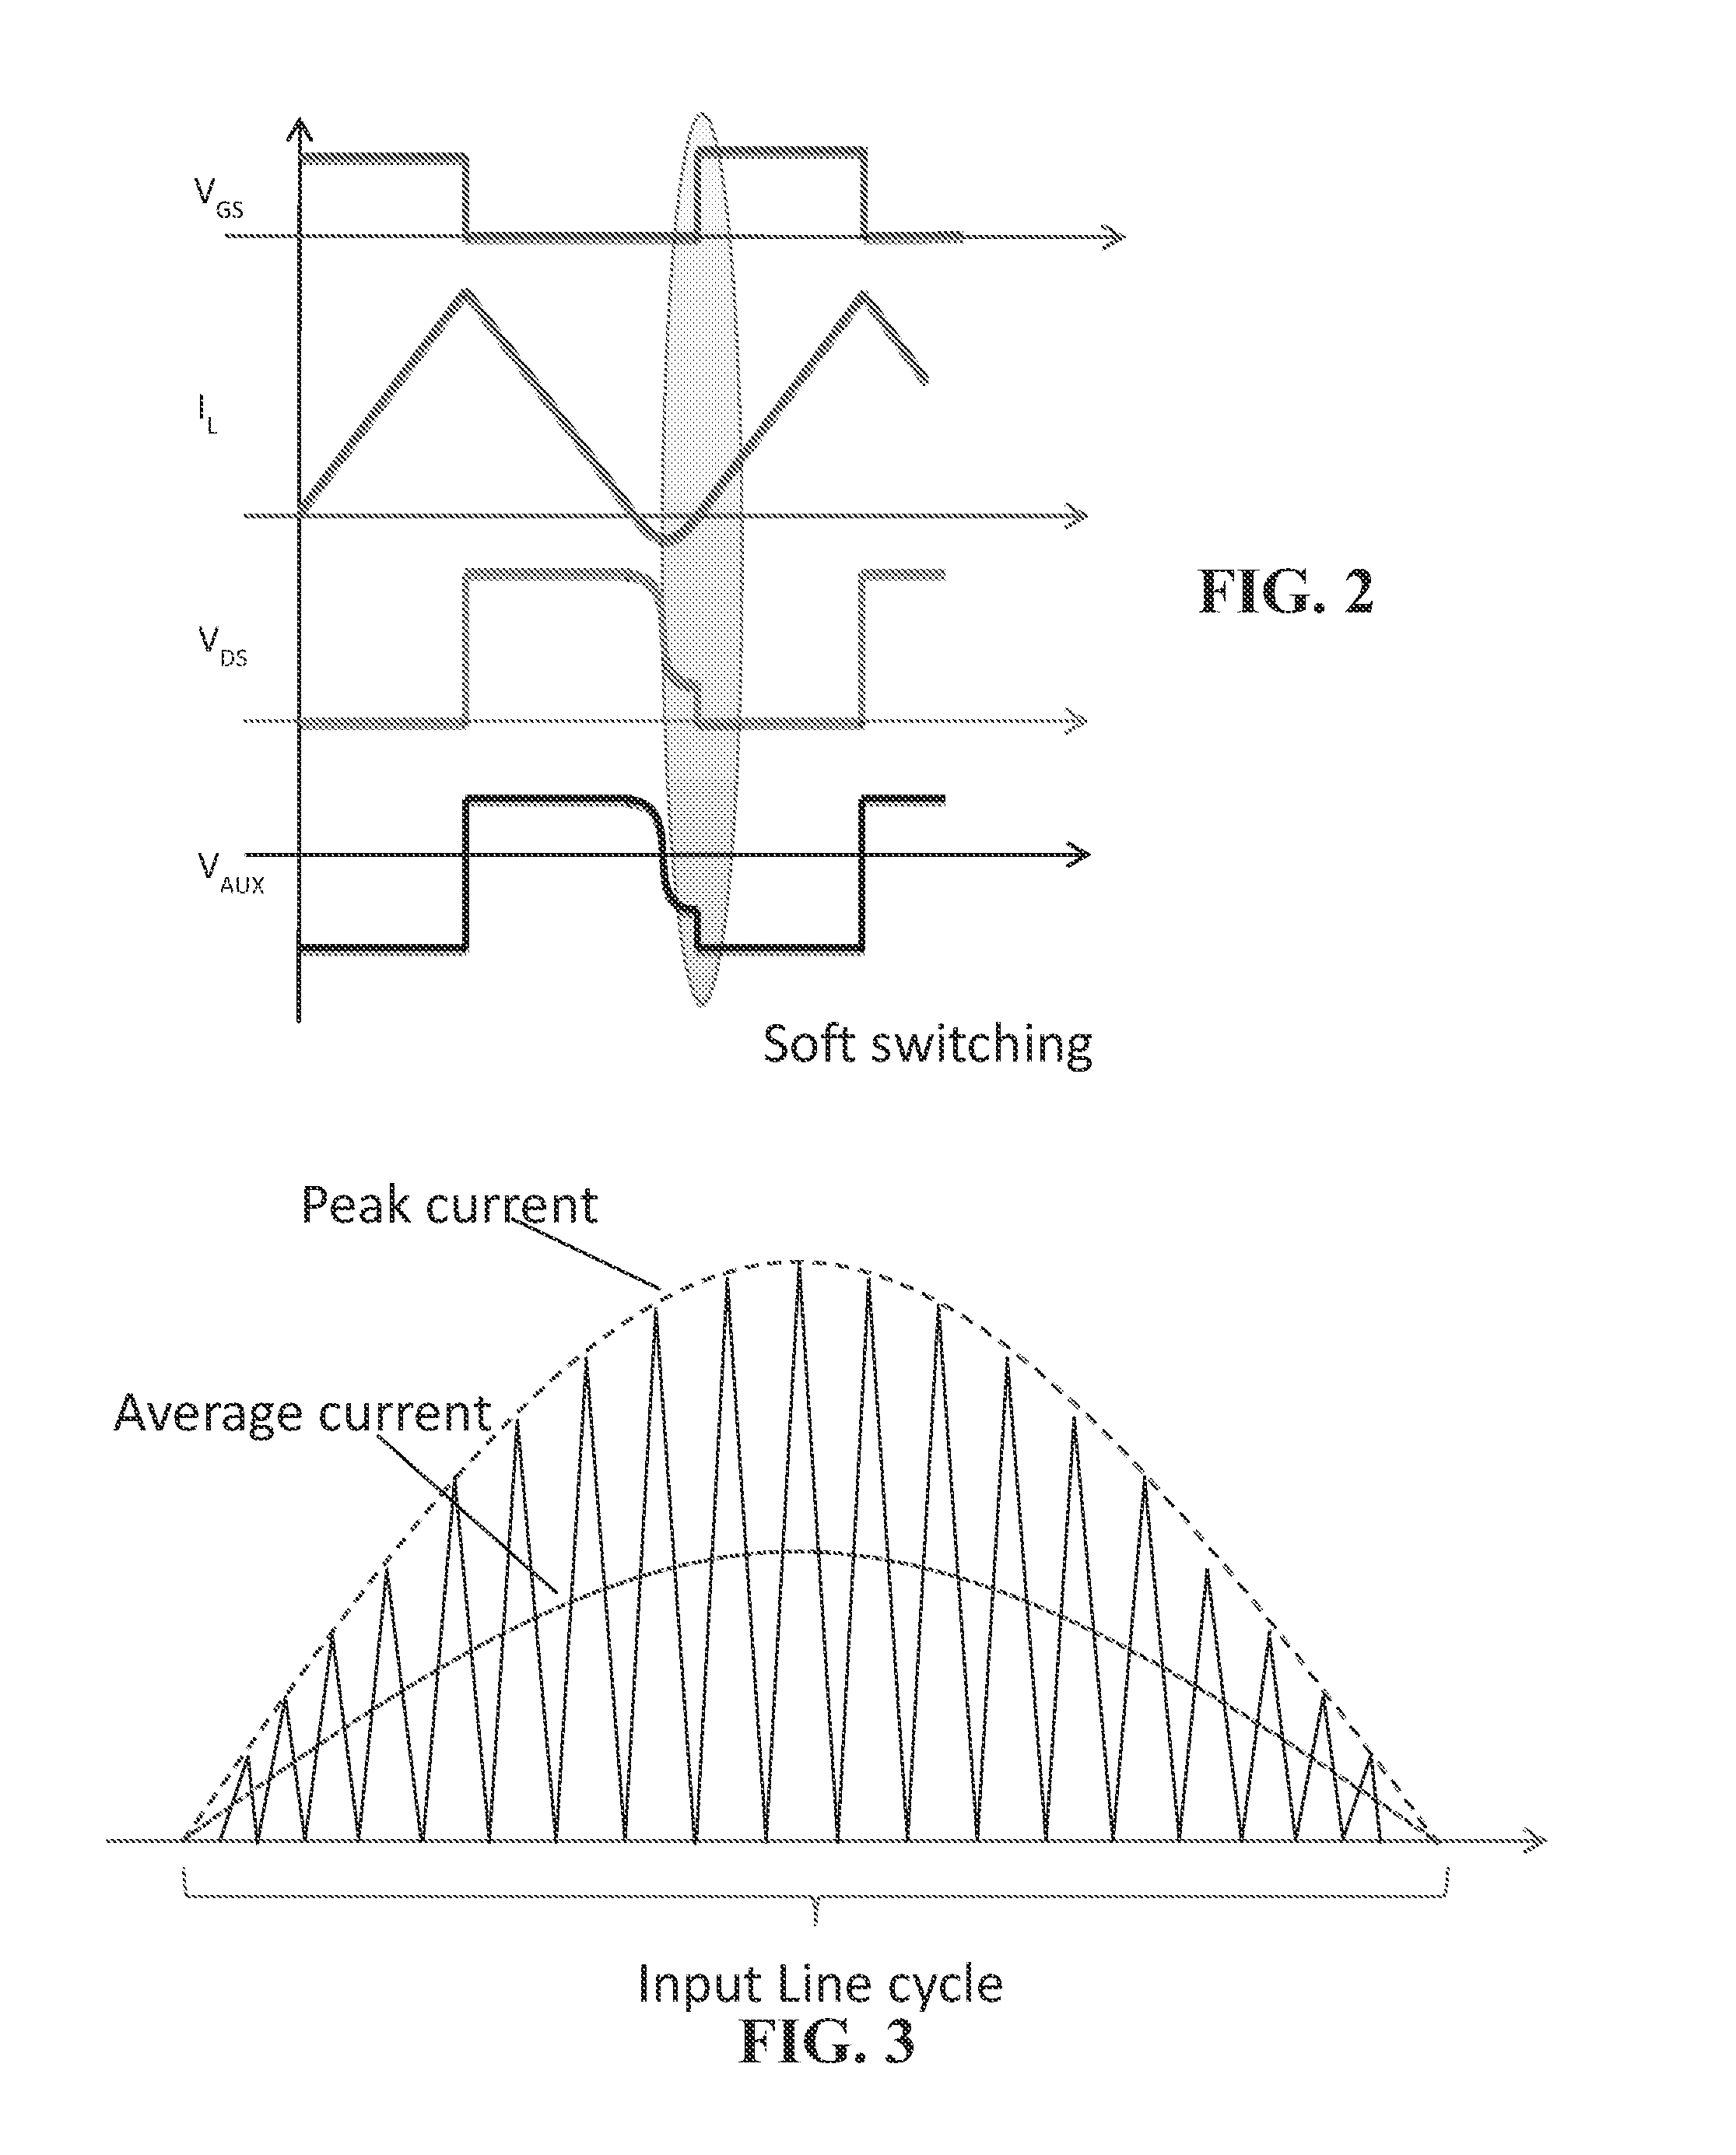 Transition mode pfc power converter adapted to switch from dcm to ccm under high load and control method